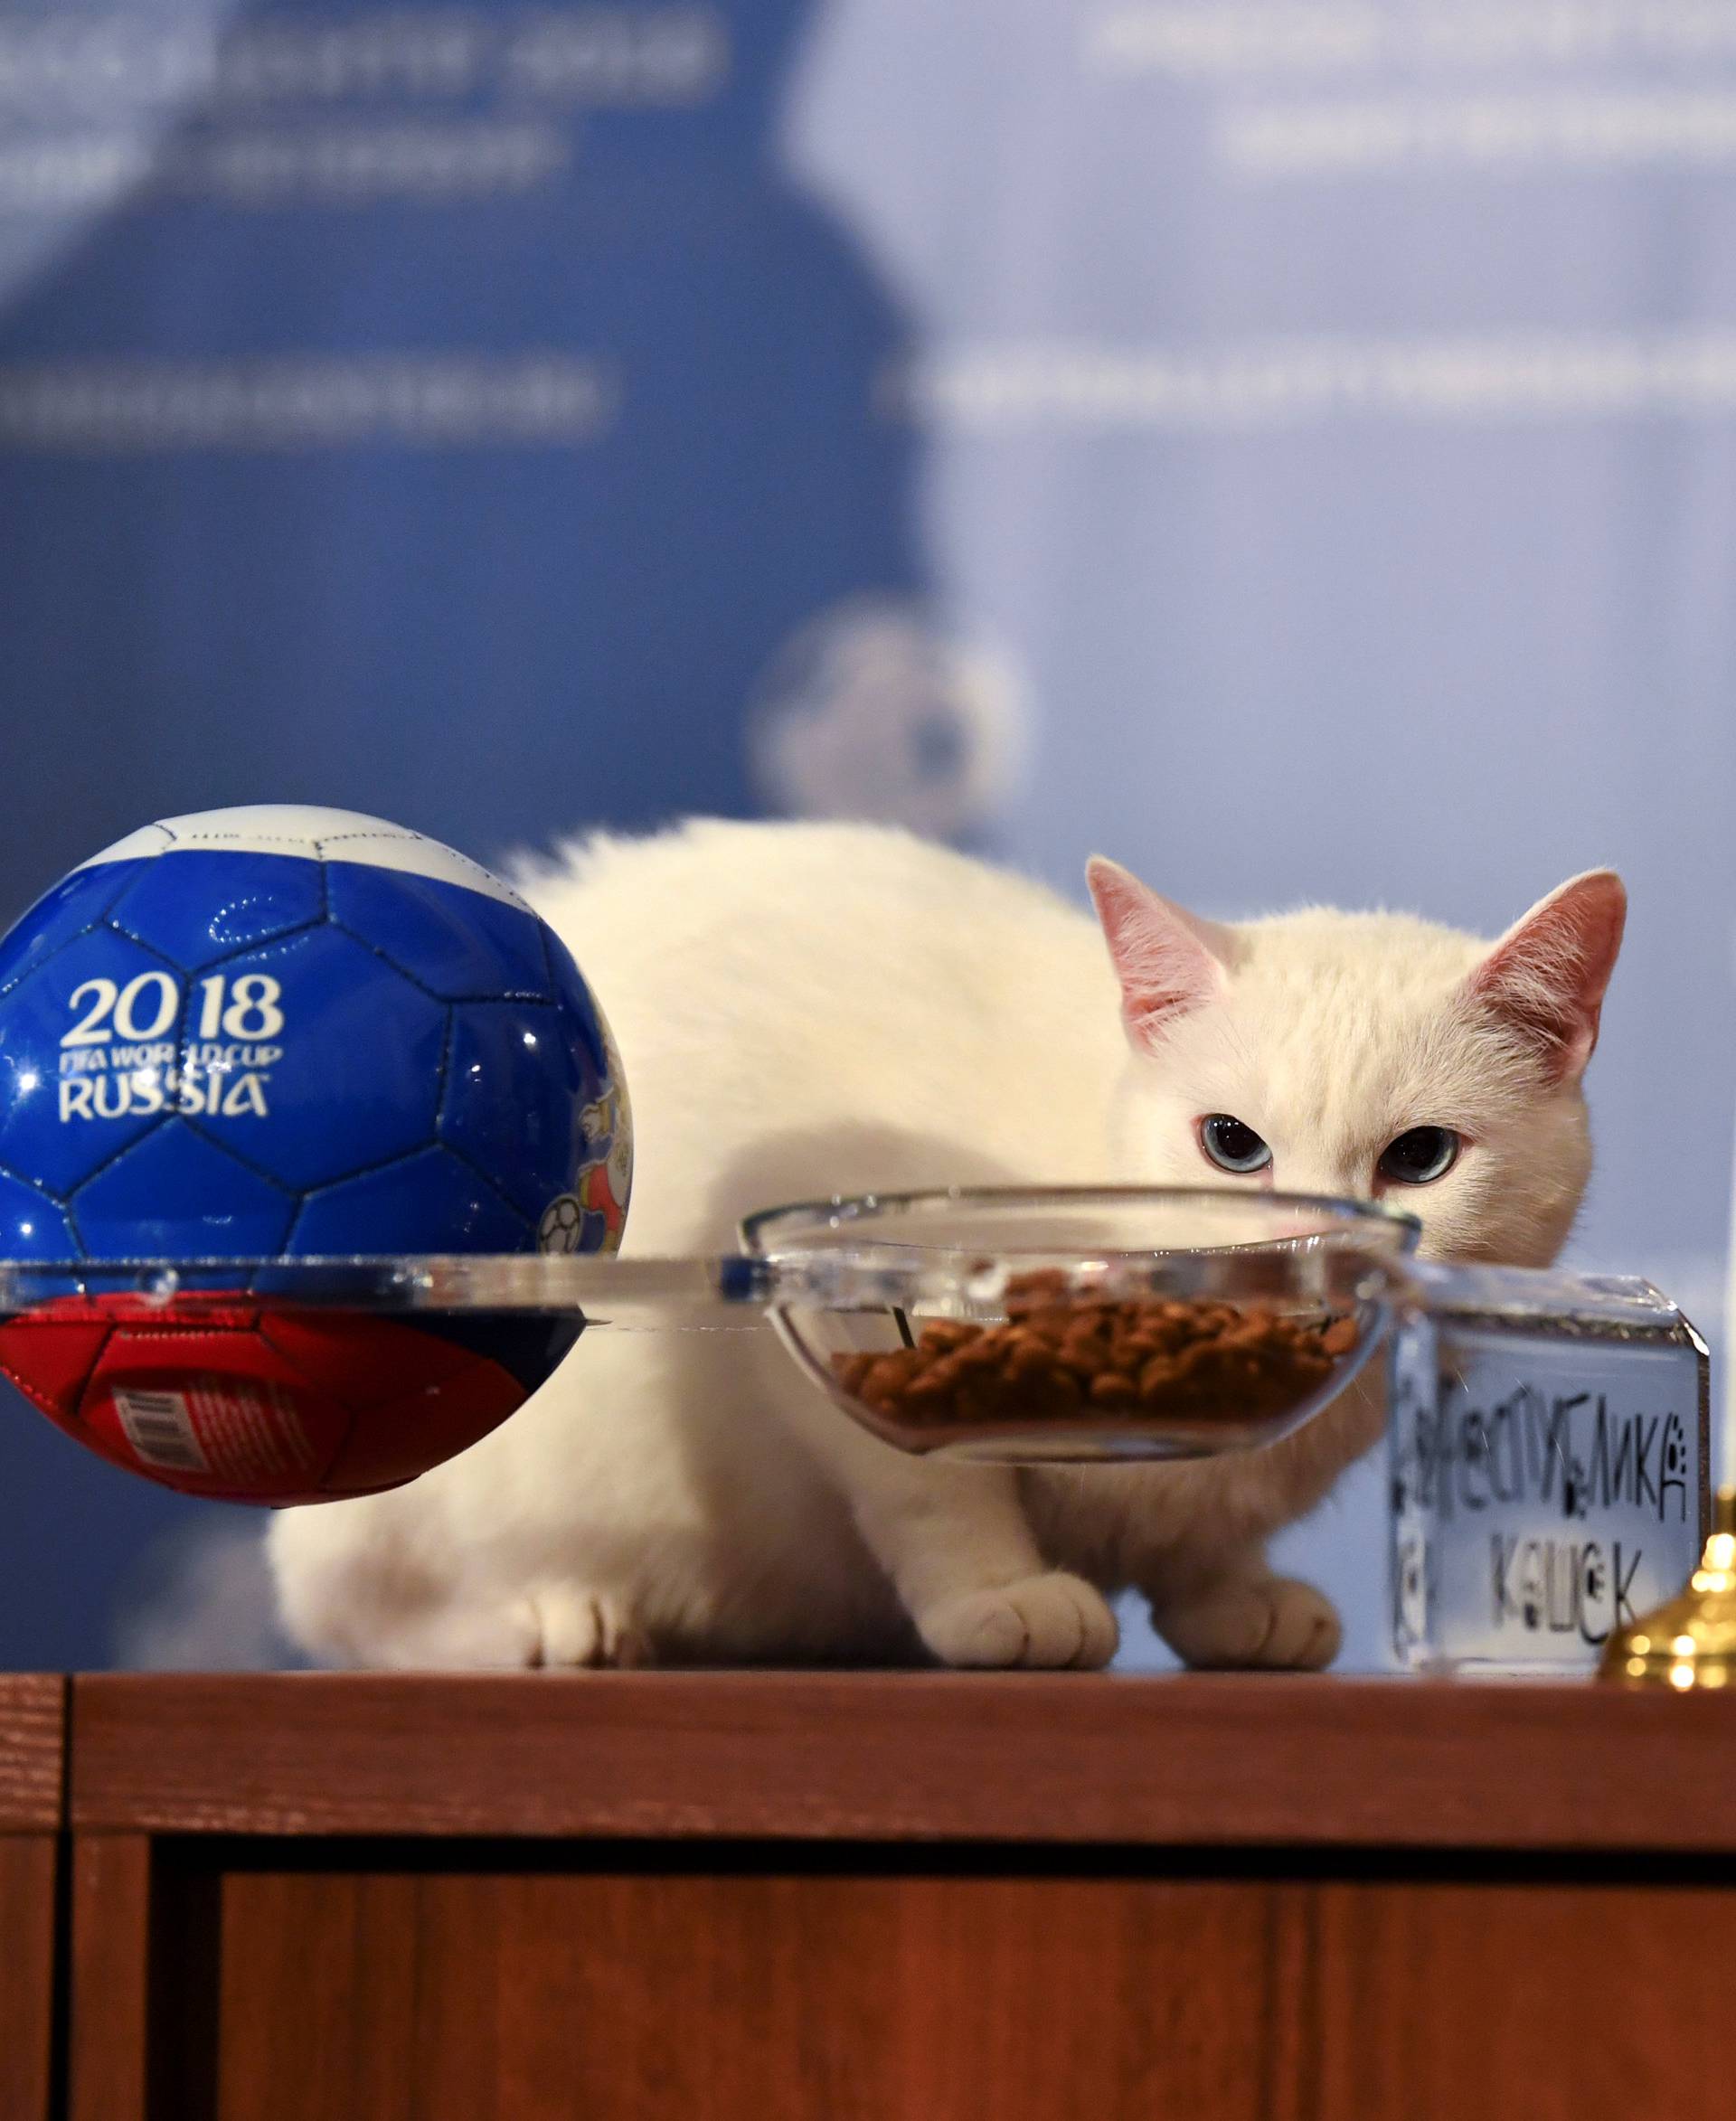 Achilles the cat attempts to predict the result of the opening match of the 2018 FIFA World Cup between Russia and Saudi Arabia in Saint Petersburg